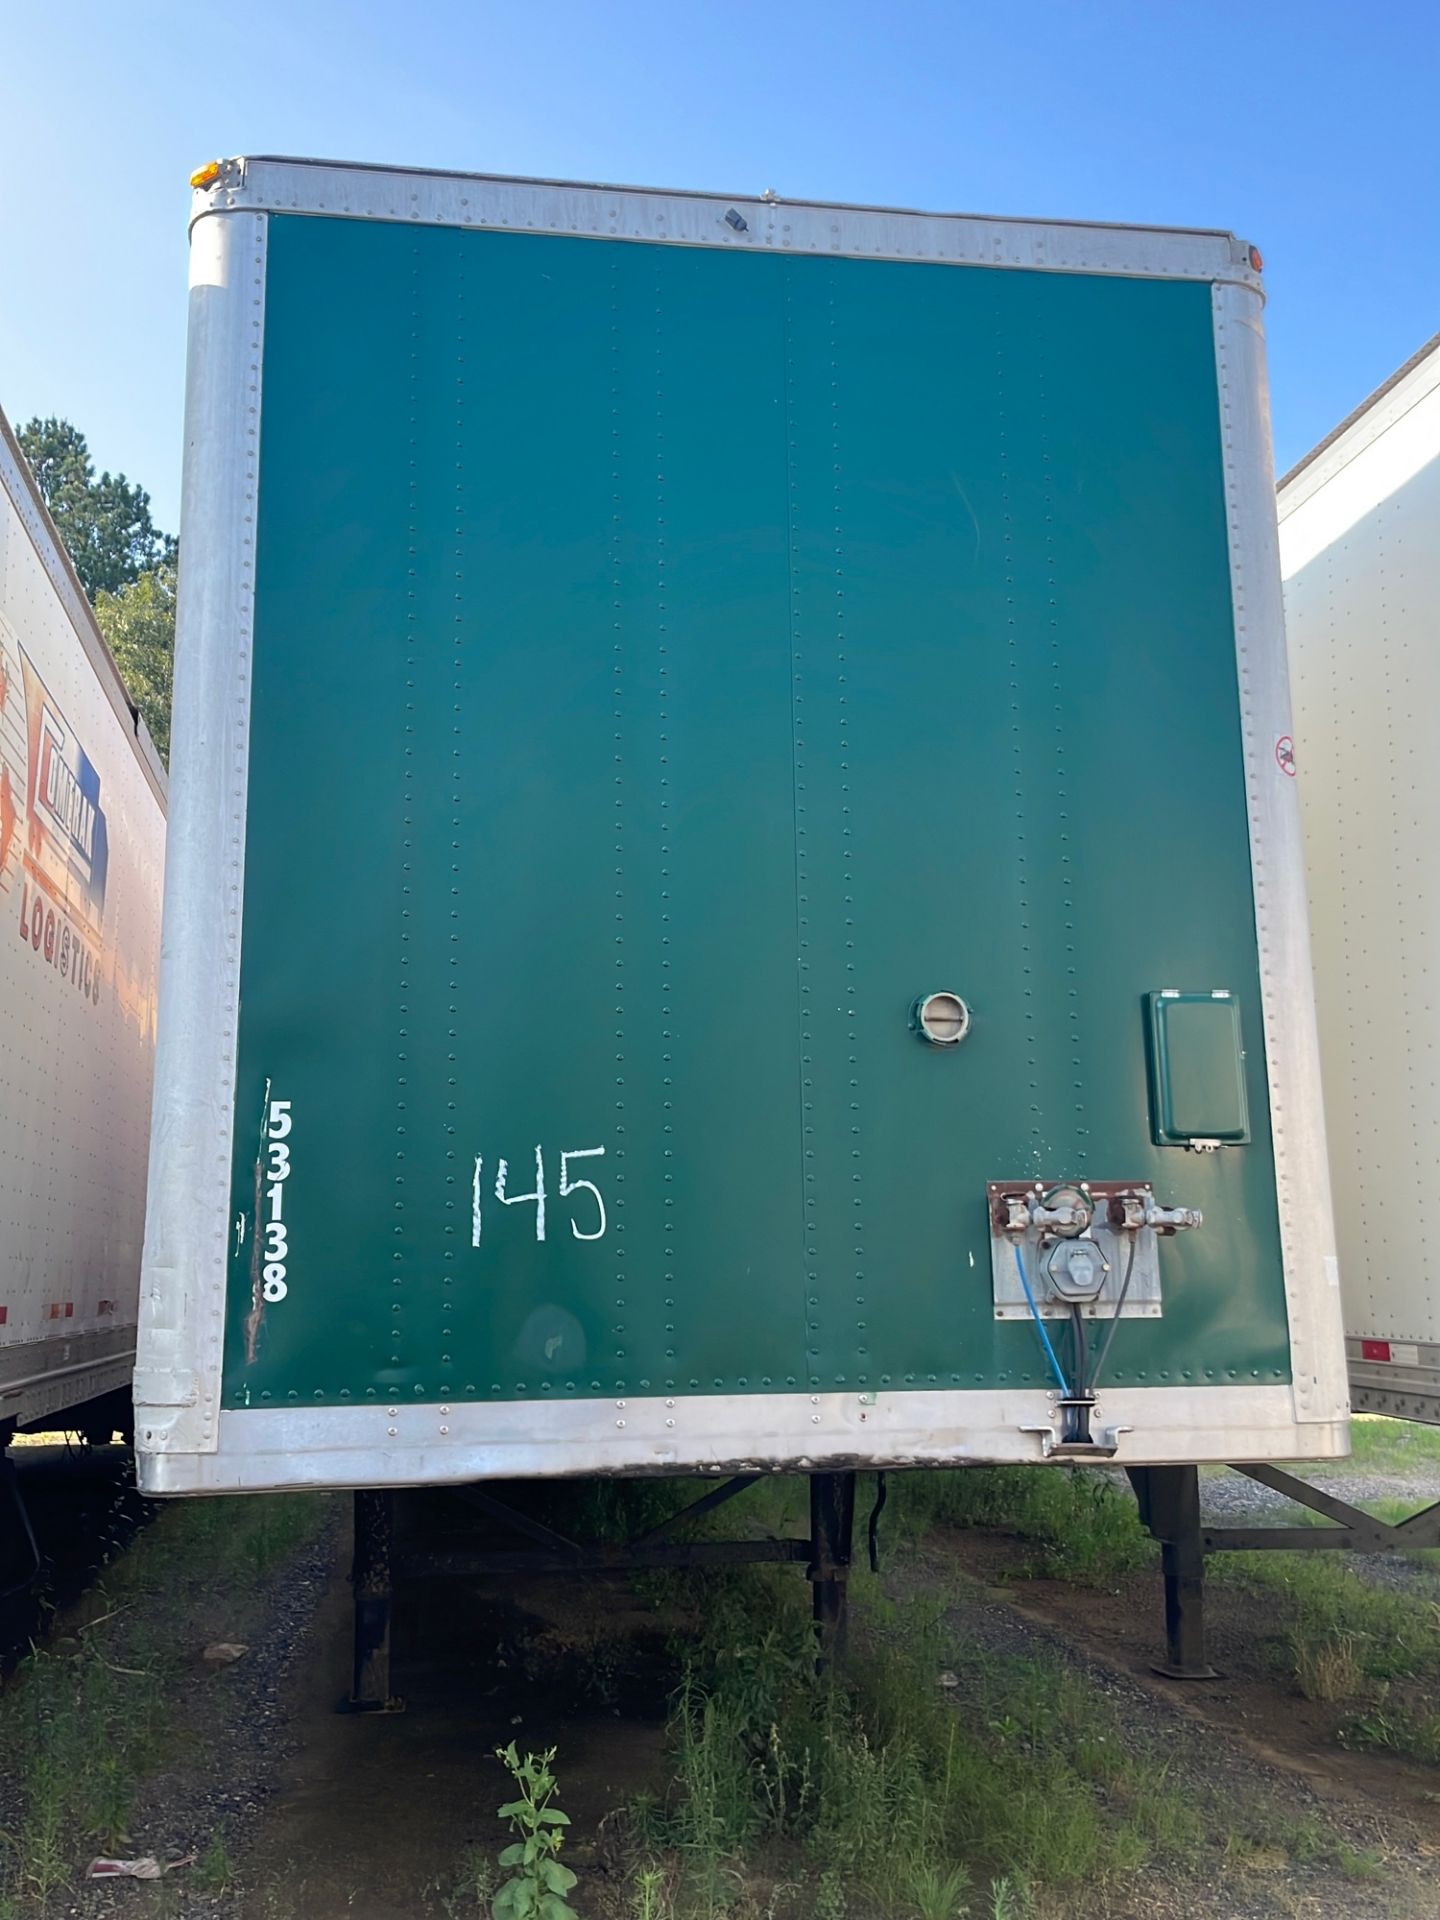 2002 Wabash Van Trailer 53’ Tandem Axle Has Title, VIN 1JJV532W62L776832 - A $25 TITLE FEE WILL BE - Image 4 of 8